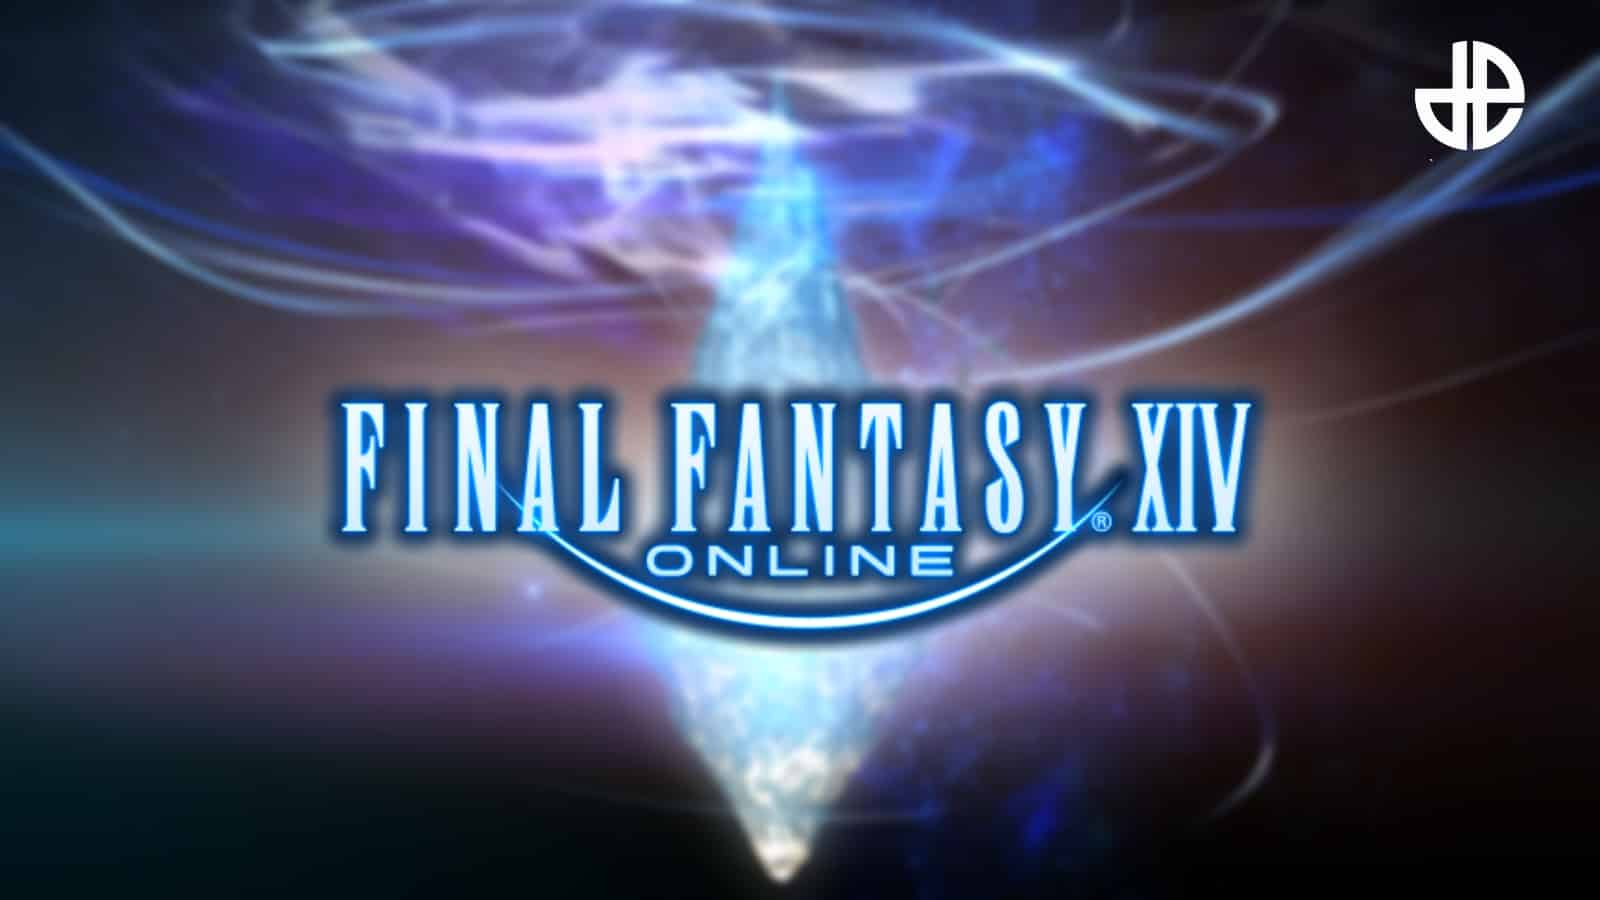 How to recover one time password square enix